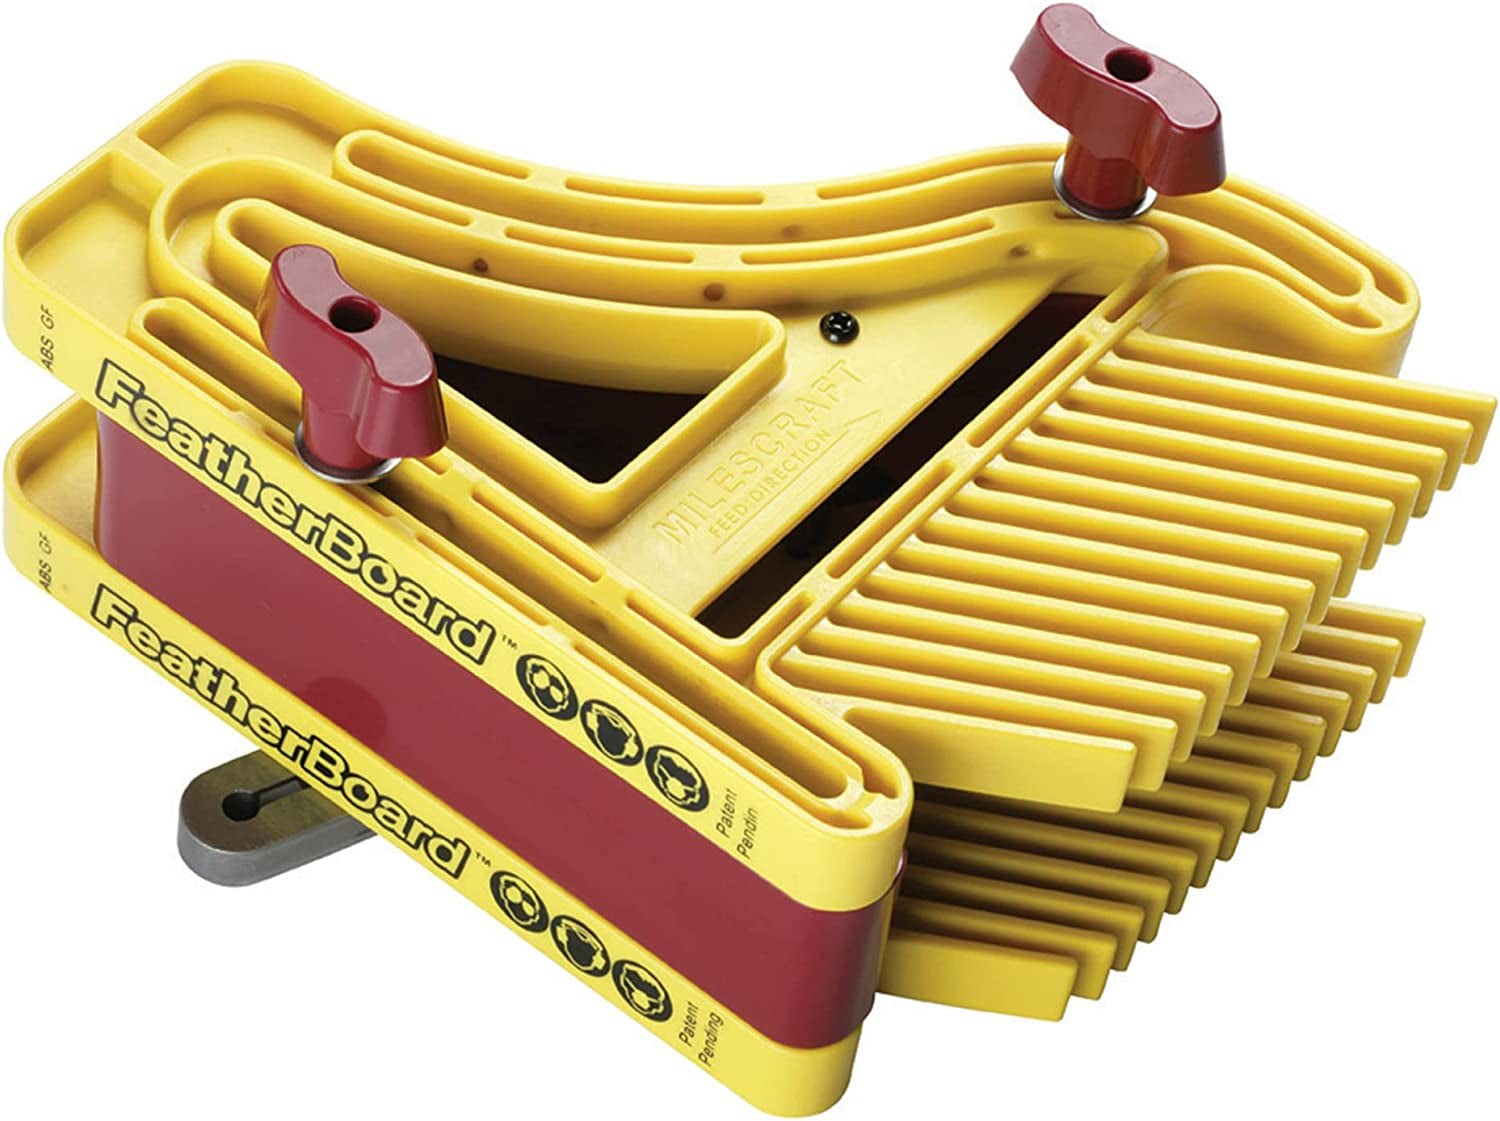 Milescraft, Milescraft 1407 D/Tfeatherboard Dual or Tandem Featherboards for Router Tables and Table or Band Saws , Yellow